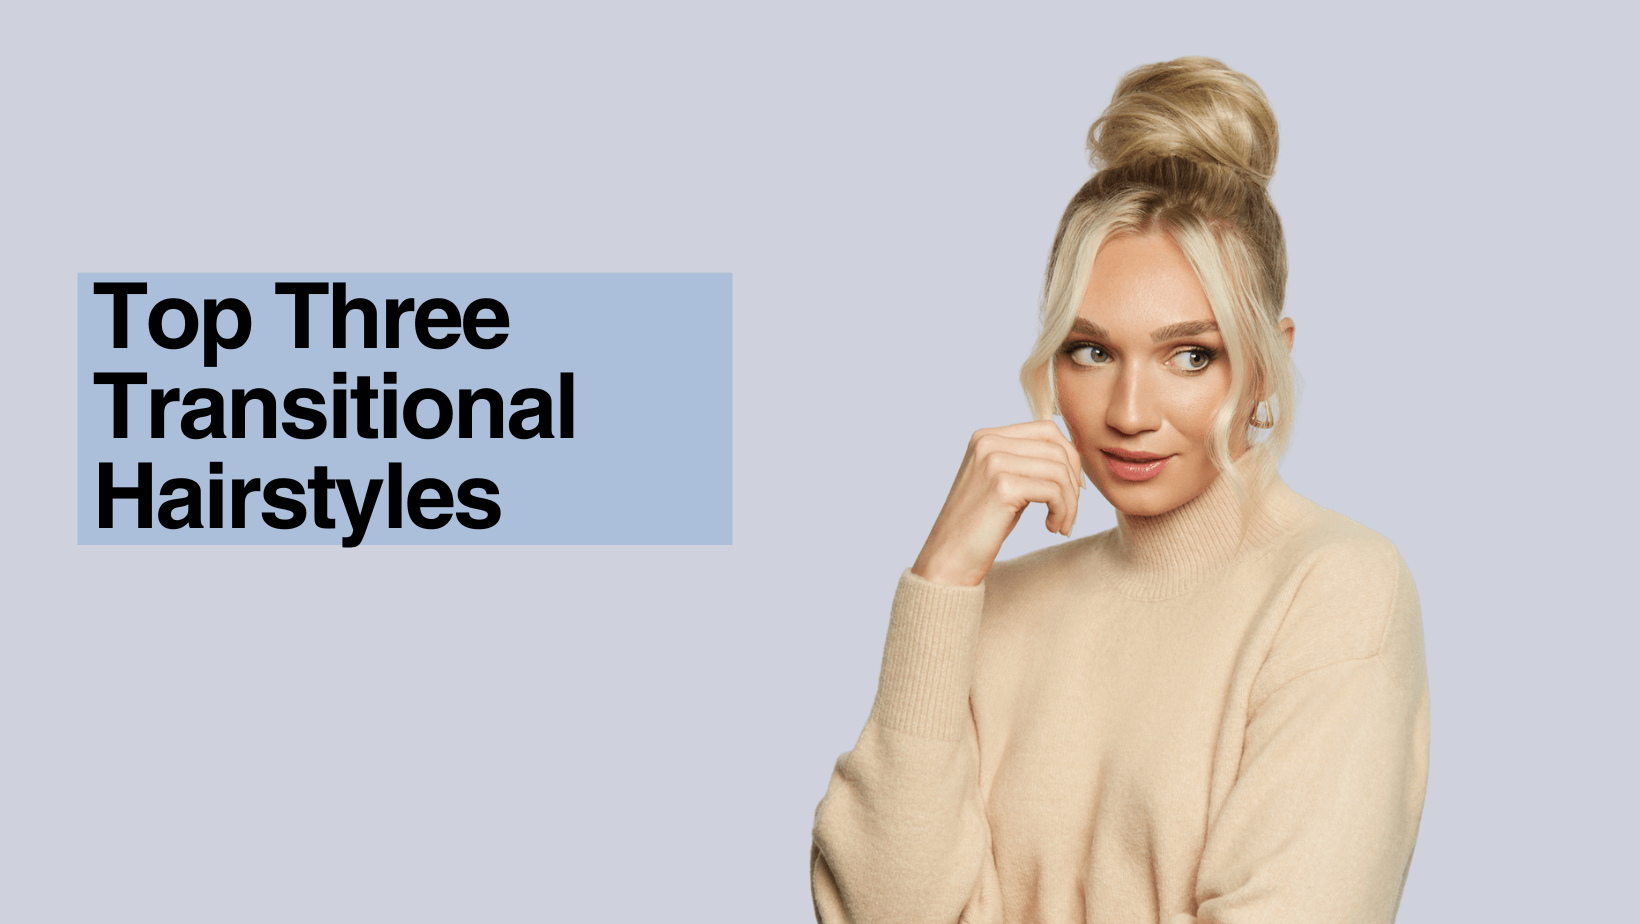 Top Three Transitional Hairstyles